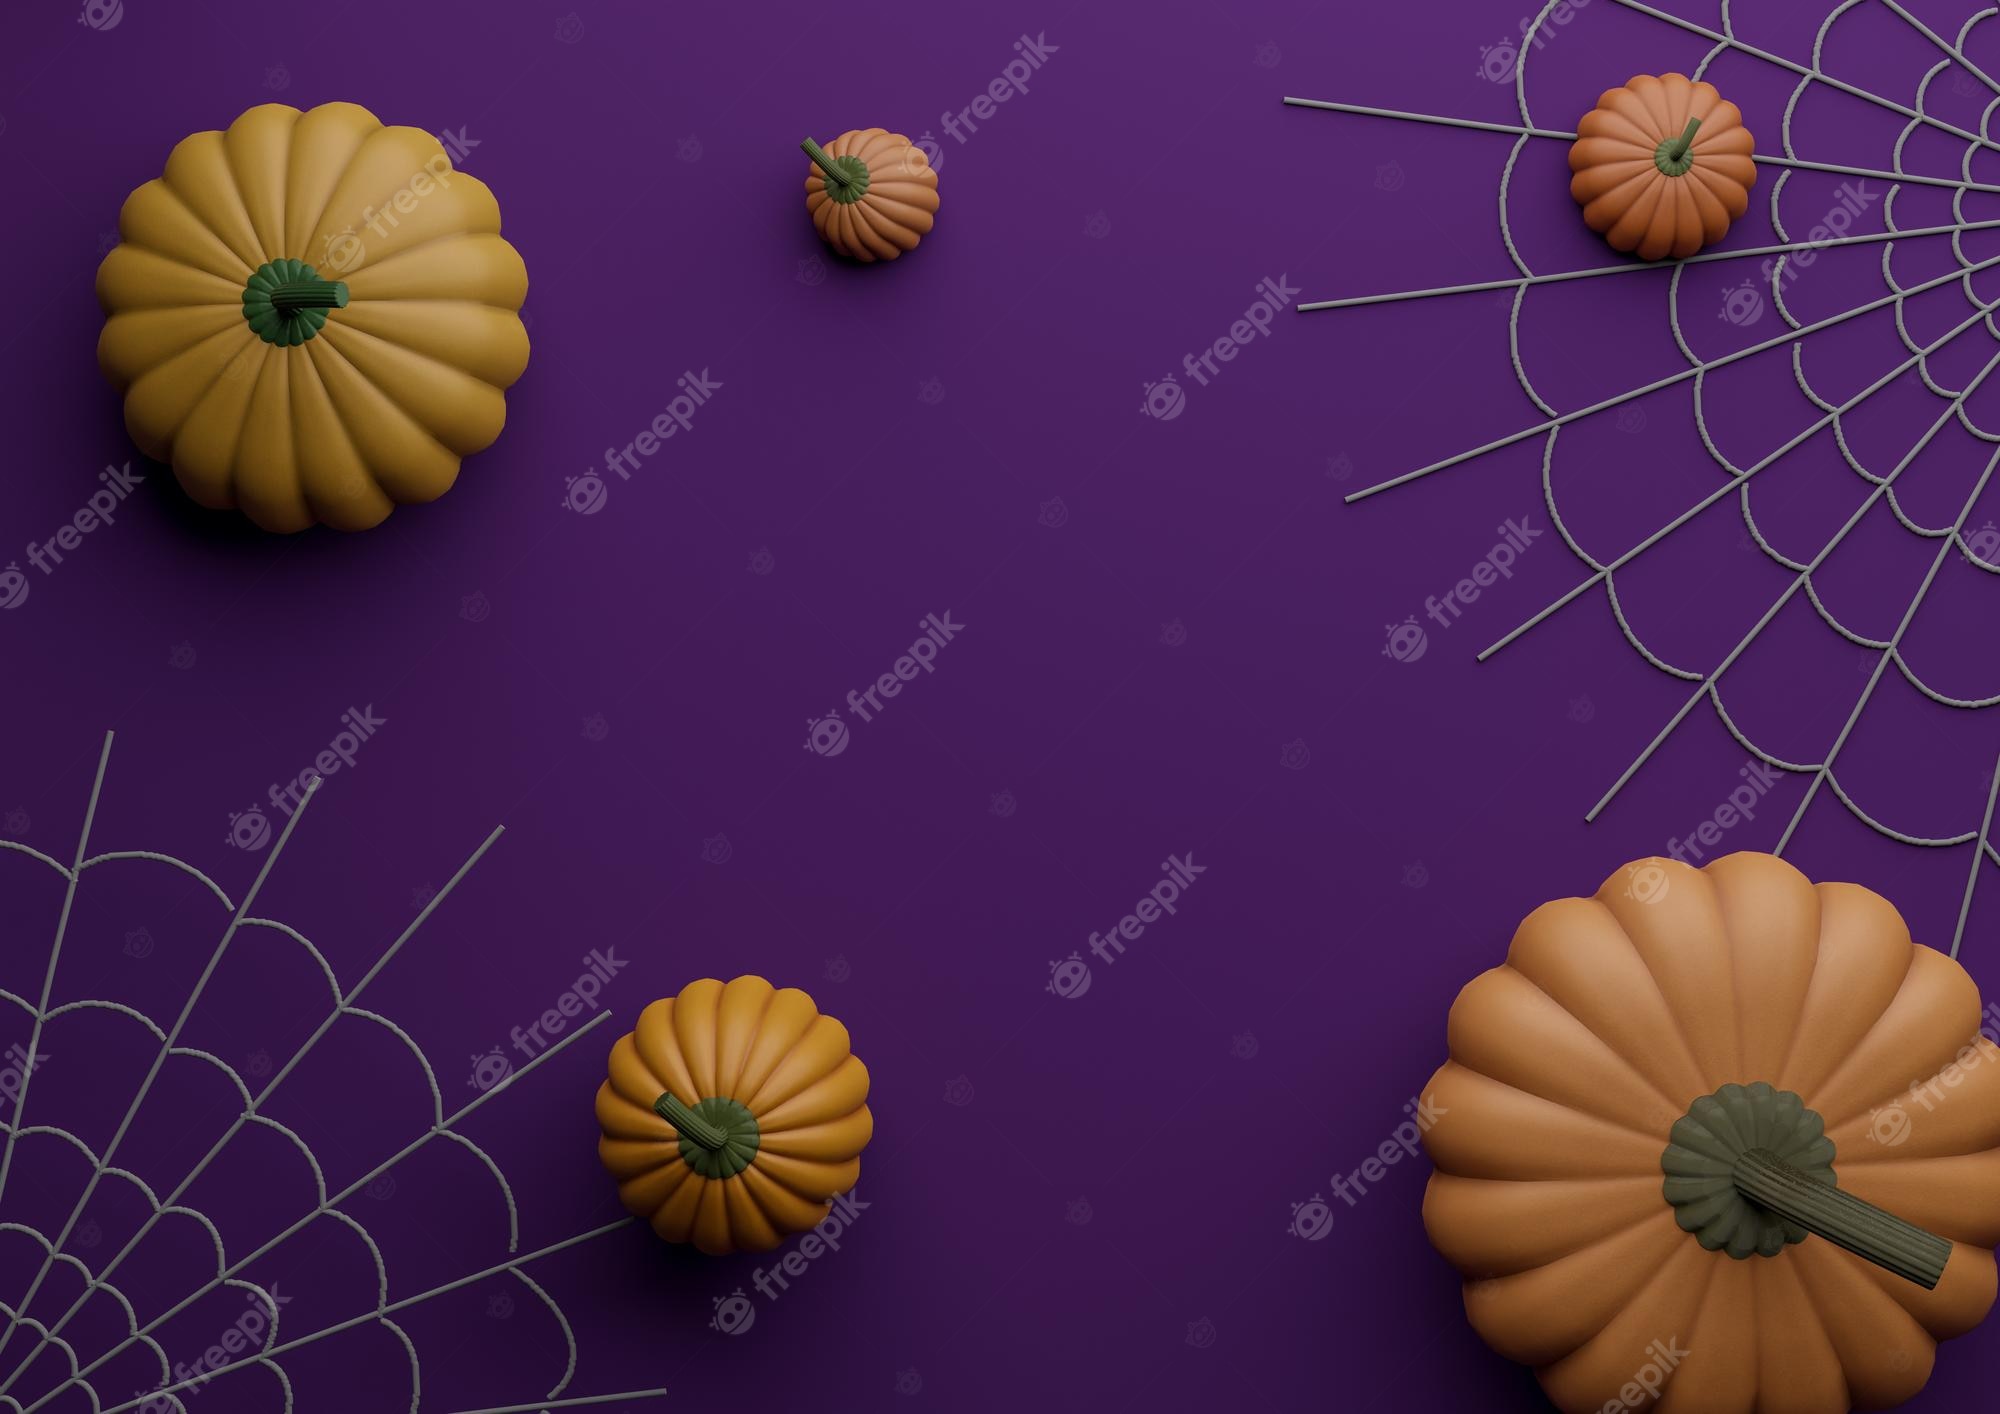 Premium photo dark purple violet d illustration autumn fall halloween themed product display podium stand background or wallpaper with pumpkins and spiderwebs photography horizontal flat lay top view from above